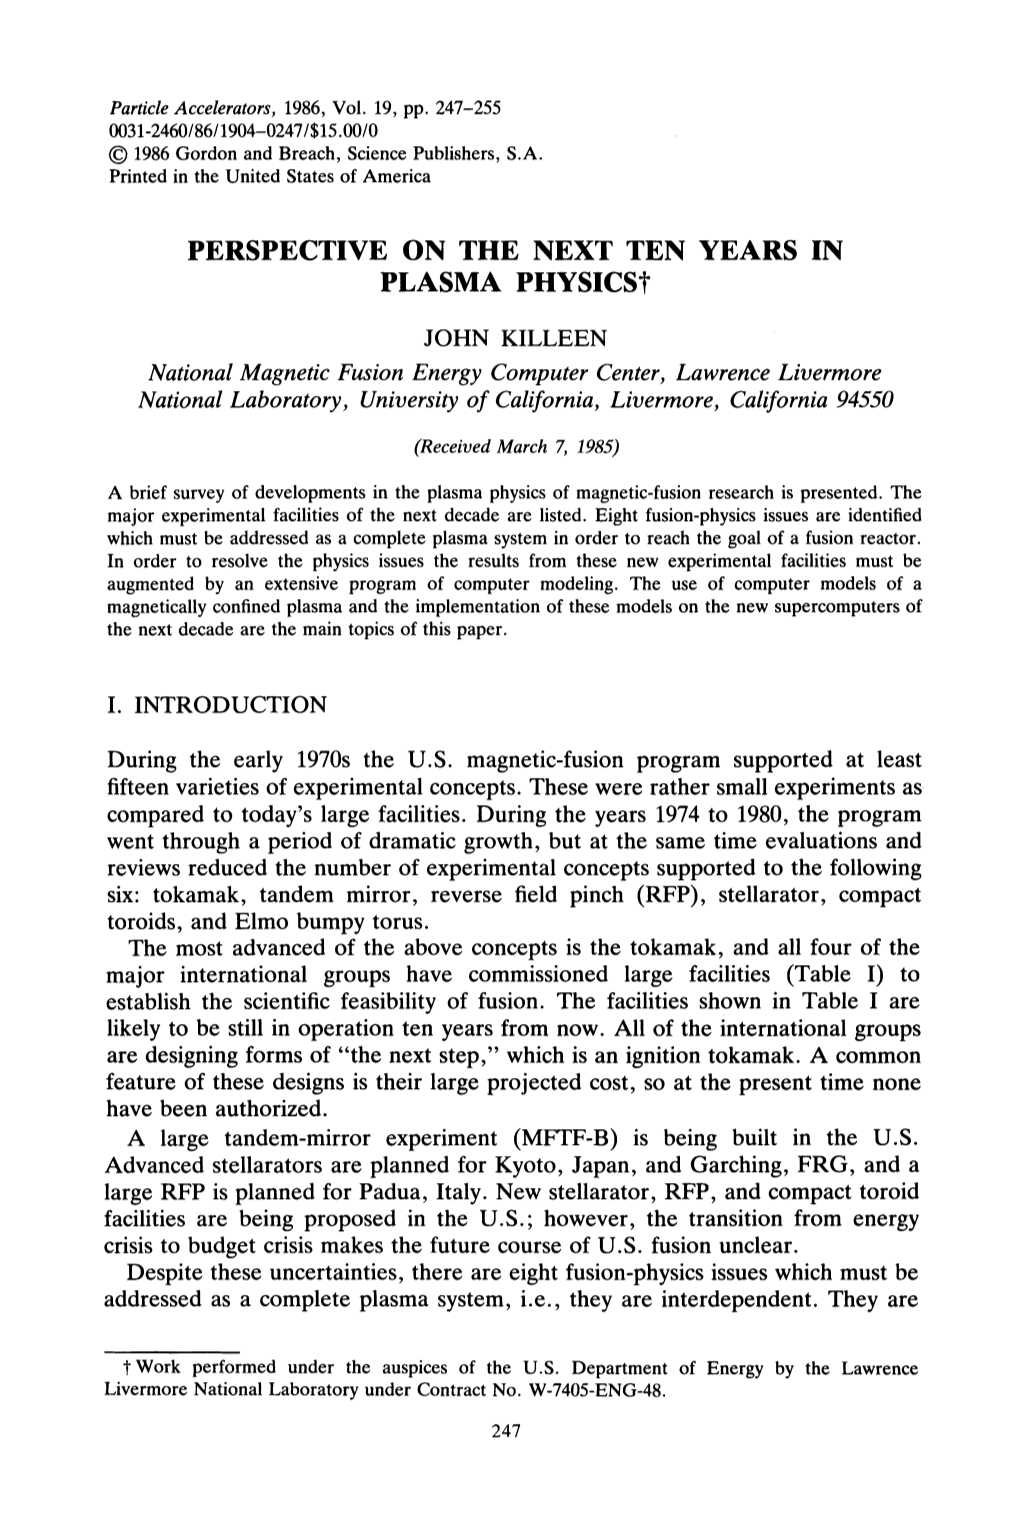 PERSPECTIVE on the NEXT TEN YEARS in PLASMA Physicst